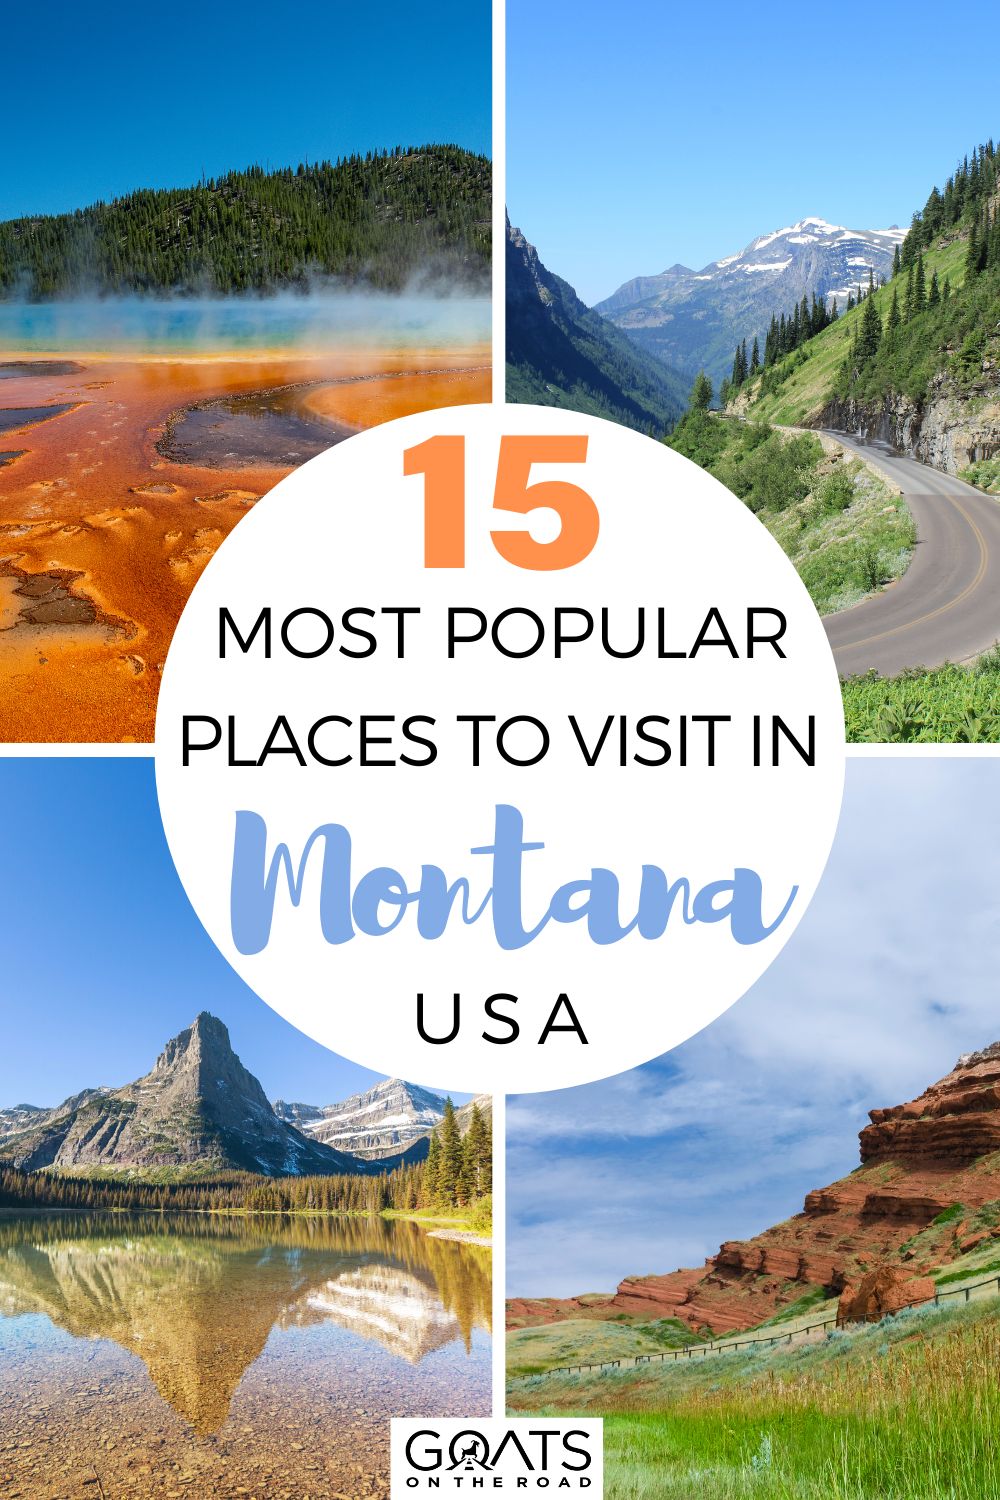 15 Most Popular Places To Visit in Montana, USA